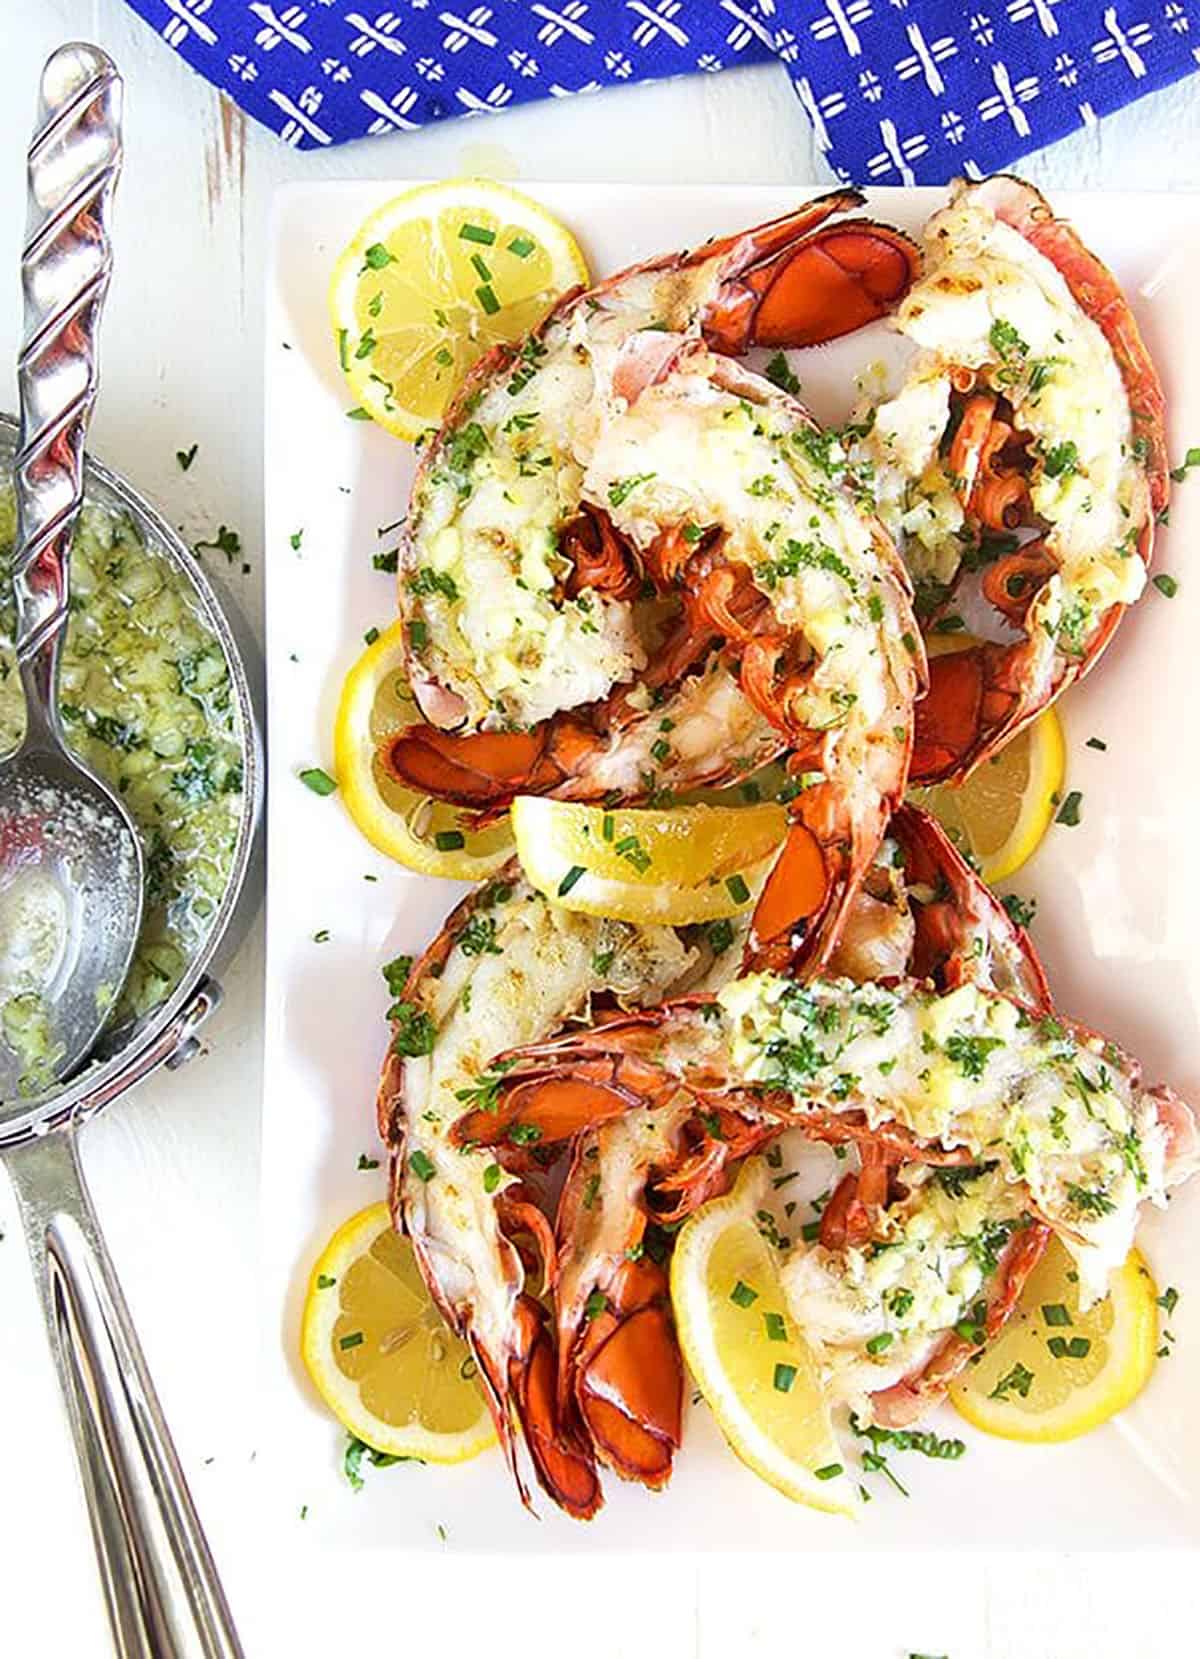 Garlic butter sauce in a saucepan next to a plate of grilled lobster tails.